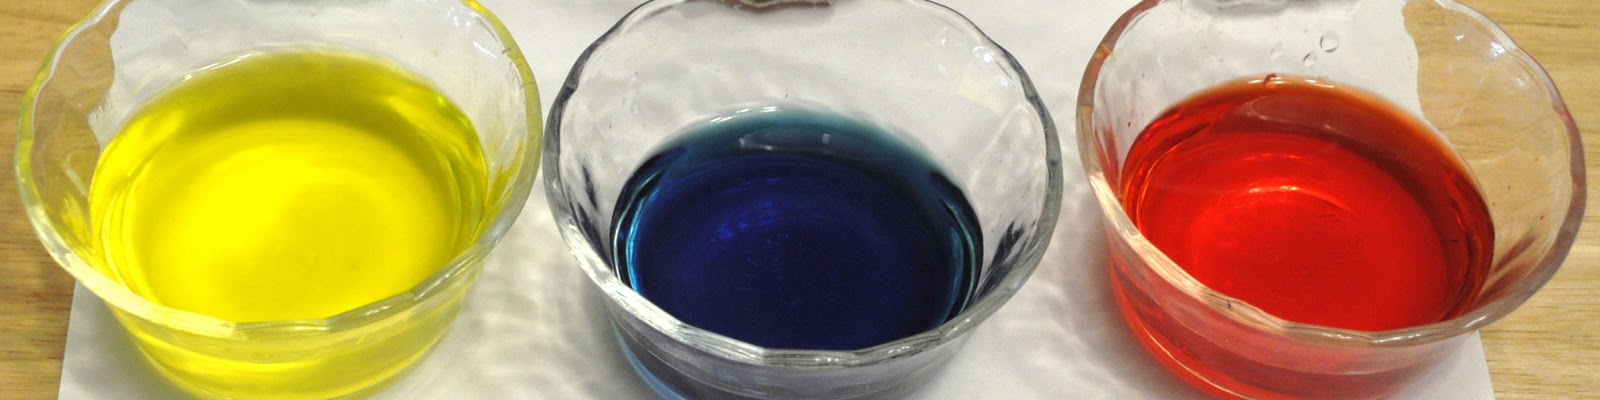 1) Mix food coloring and water